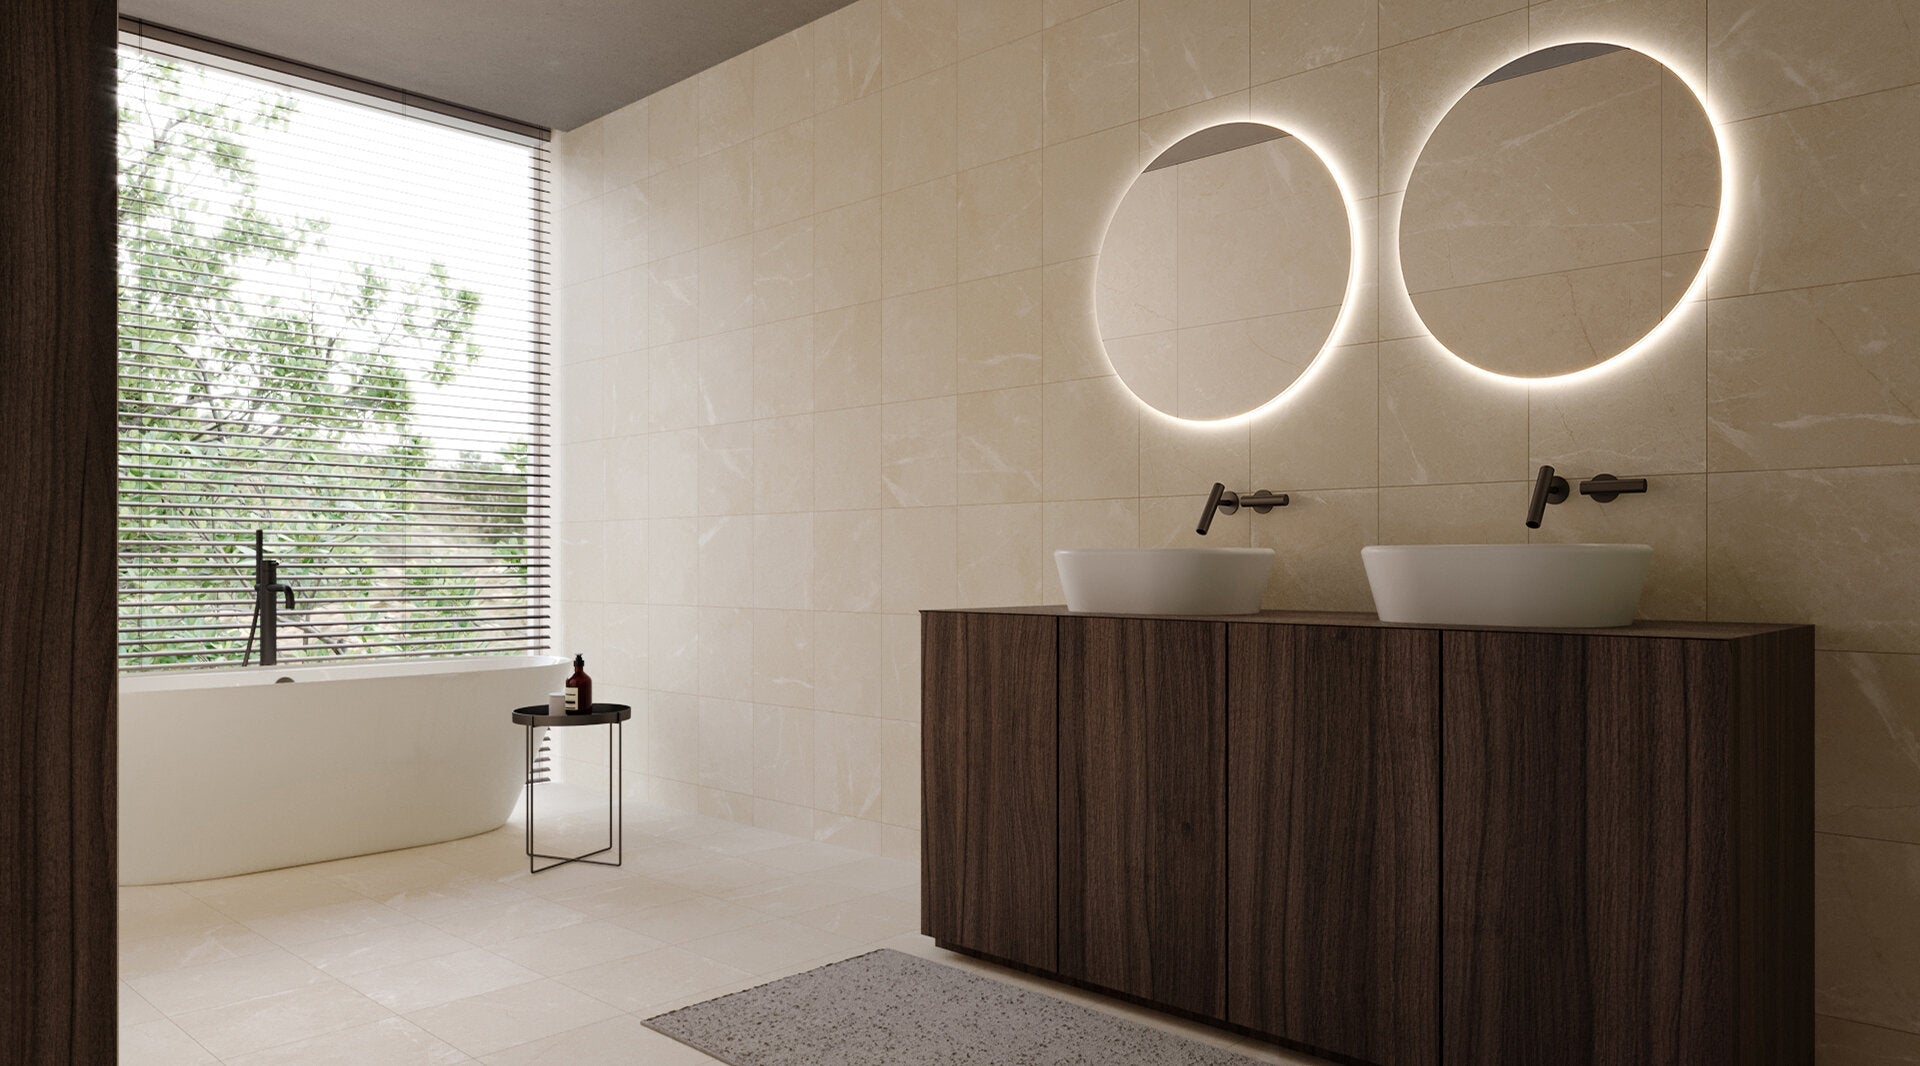 Elegant modern bathroom featuring Anatolia Torino porcelain tile collection with dual vessel sinks, illuminated circular mirrors, and a bathtub by a window.